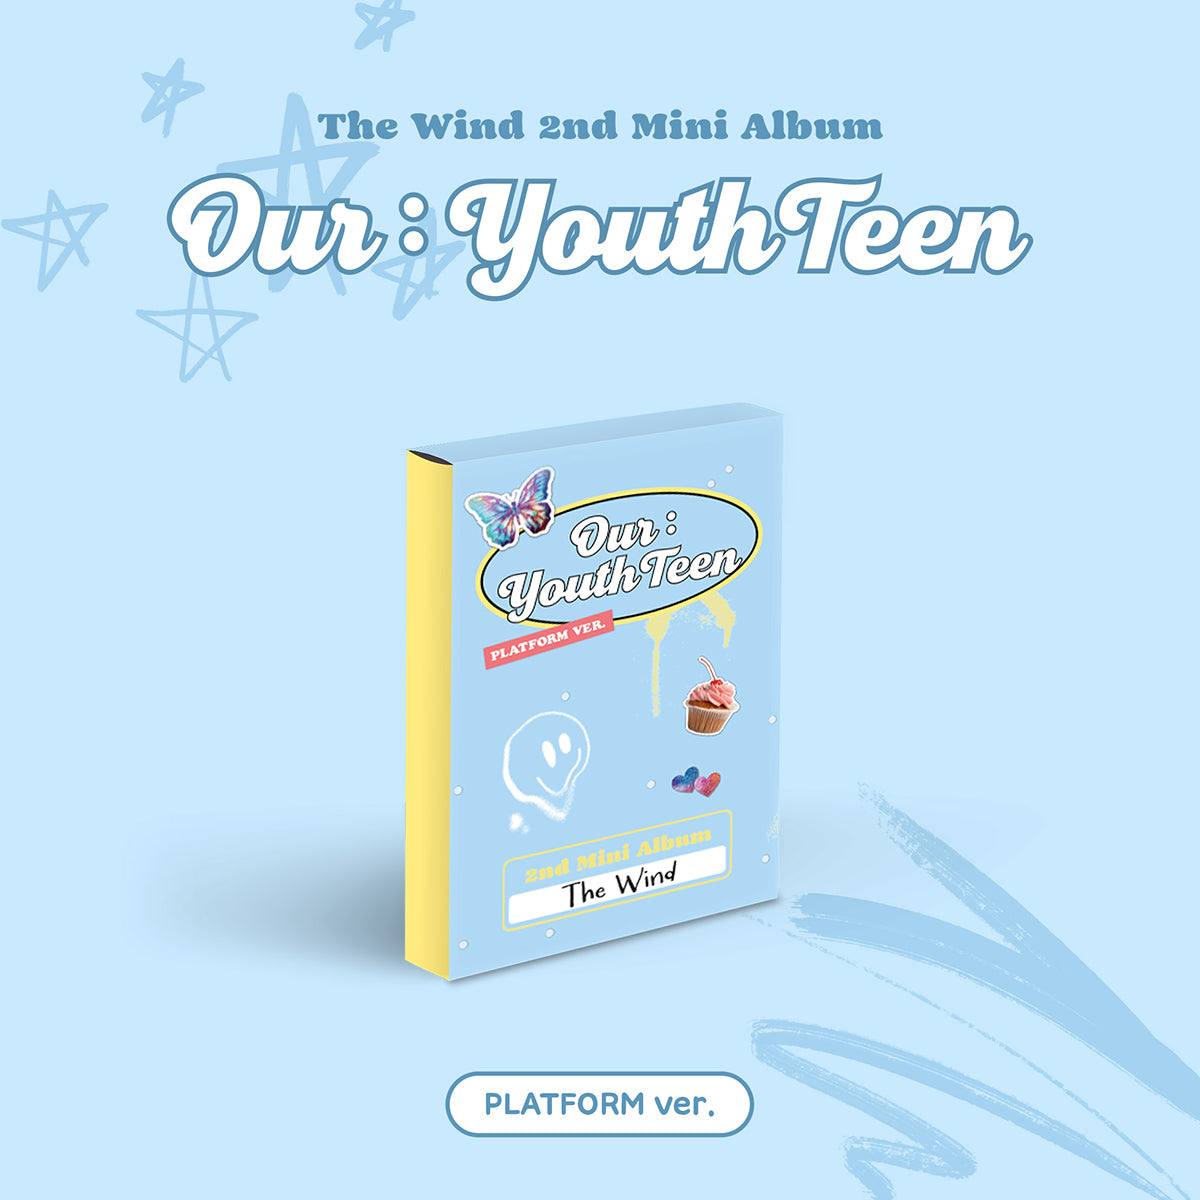 The Wind - Our : YouthTeen (Platform Ver.)